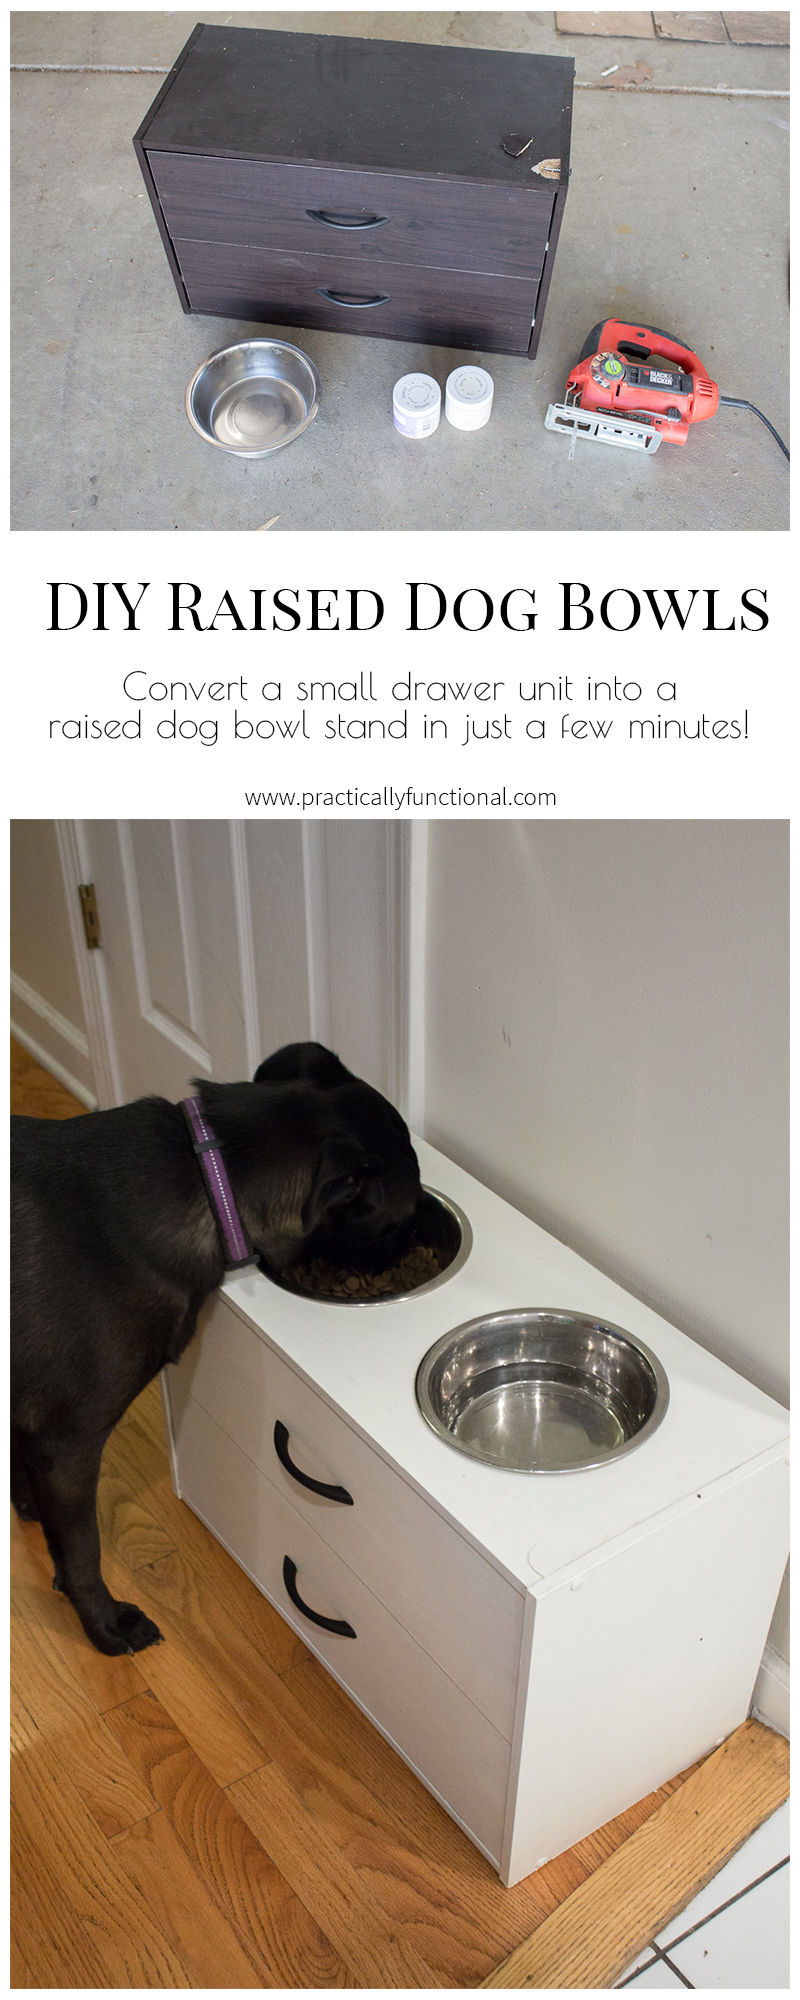 Create a DIY raised dog bowl stand from an old dresser in just a few minutes!